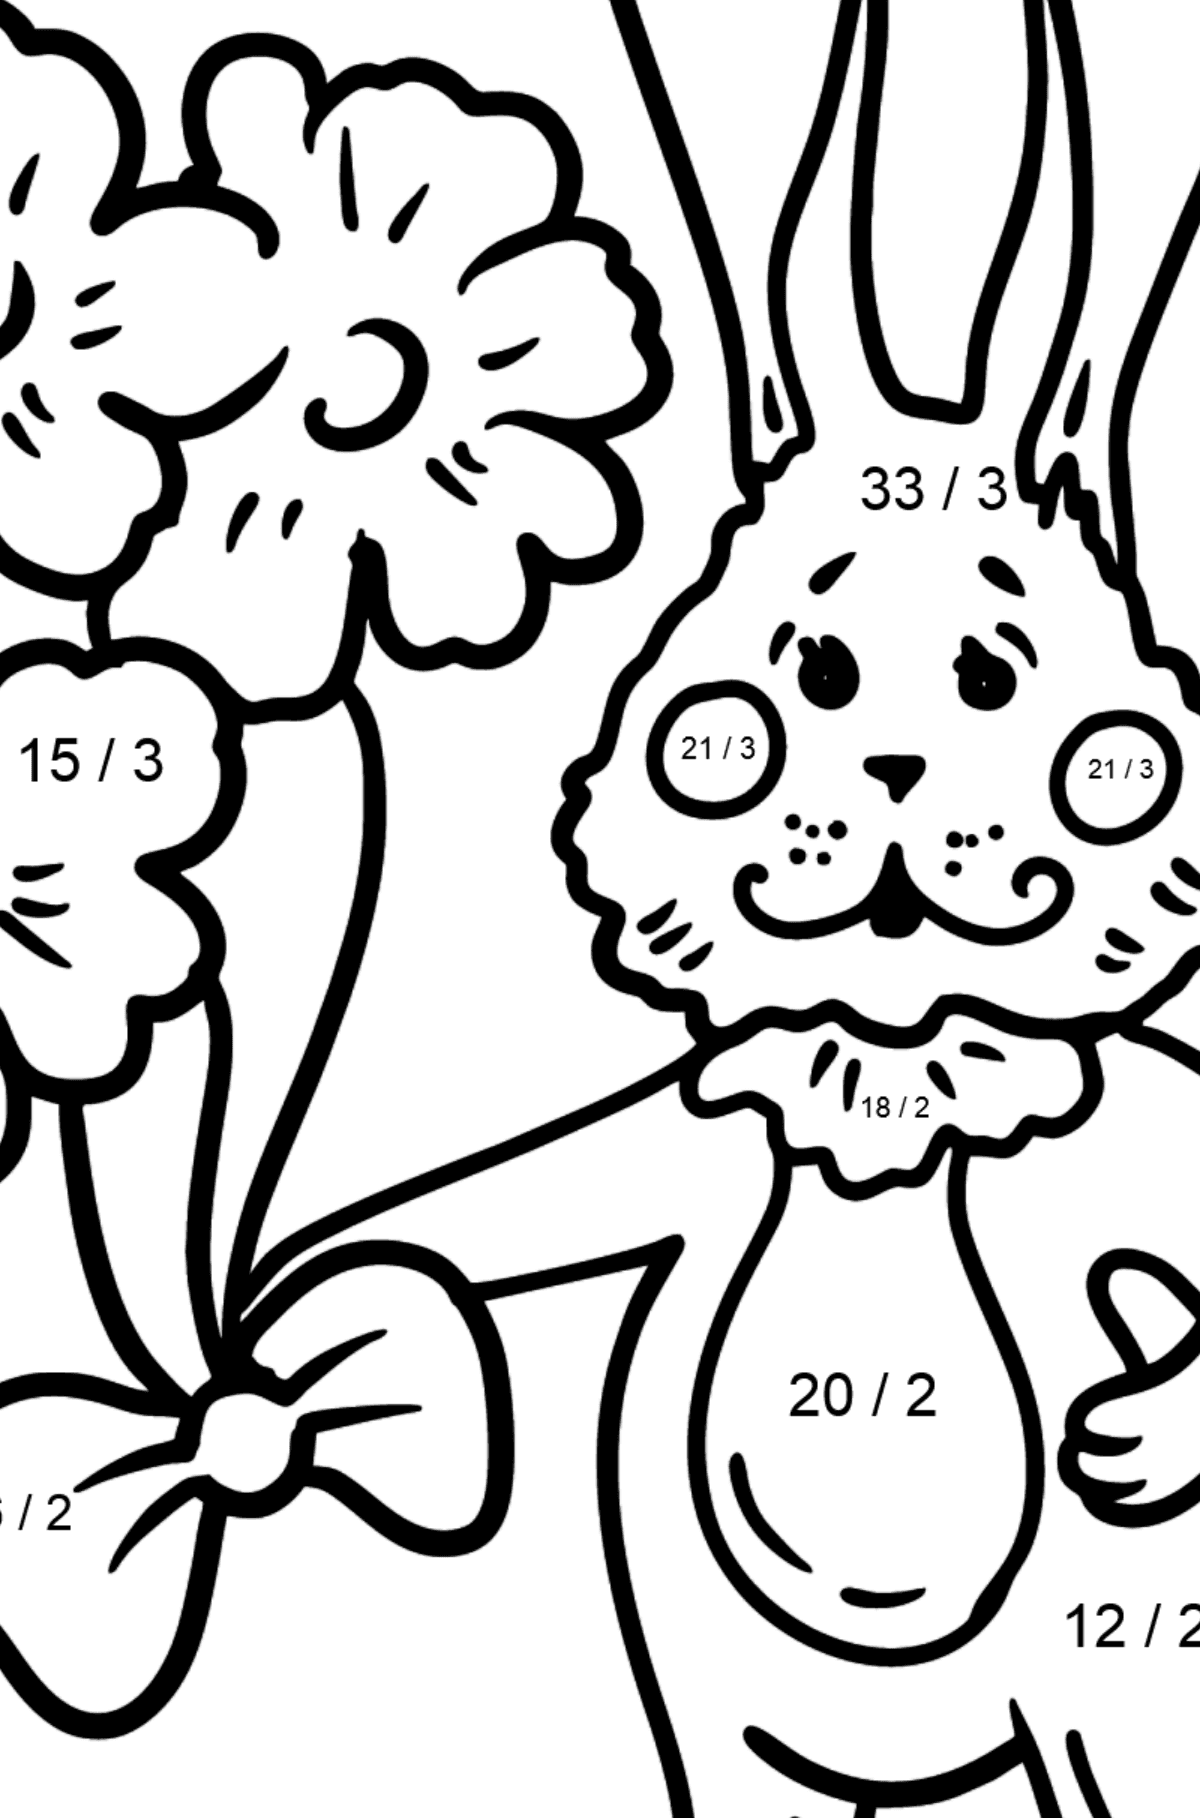 Bunny with a Bouquet of Flowers coloring page - Math Coloring - Division for Kids